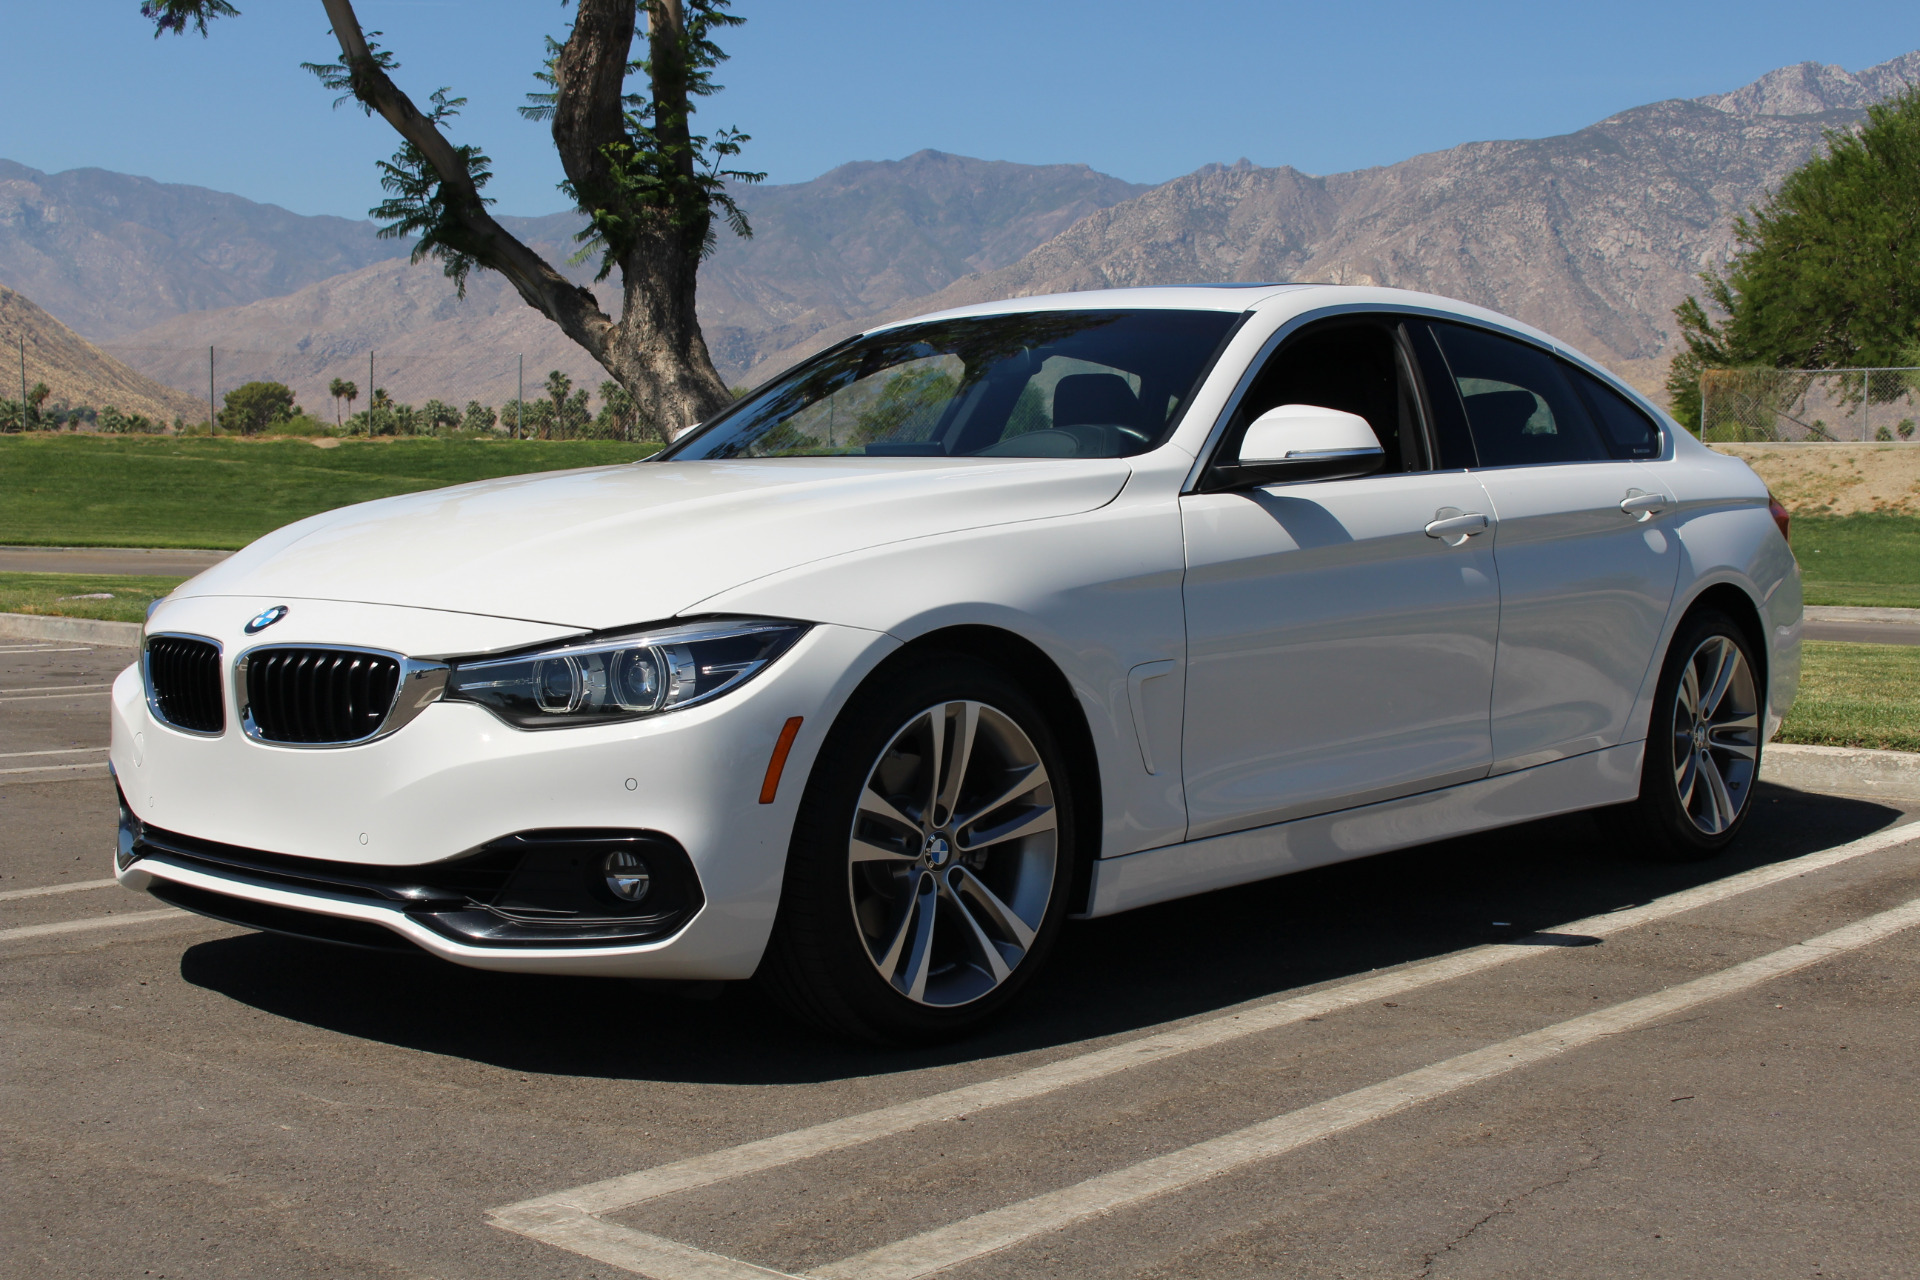 2018 BMW 4 Series 430i Gran Coupe Stock # BM161 for sale near Palm